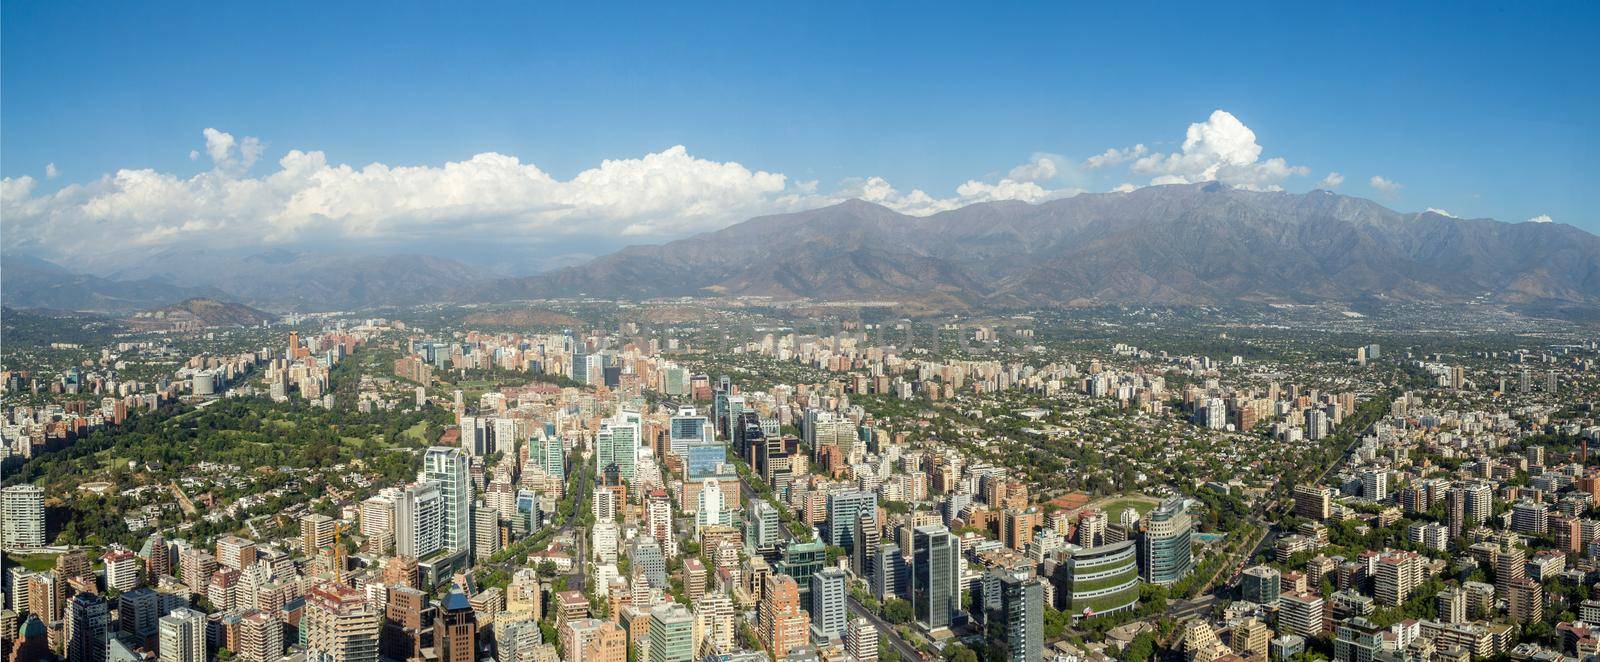 Santiago de Chile, Chile - December 8, 2015: Panoramic city view from the Gran Torre Santiago.